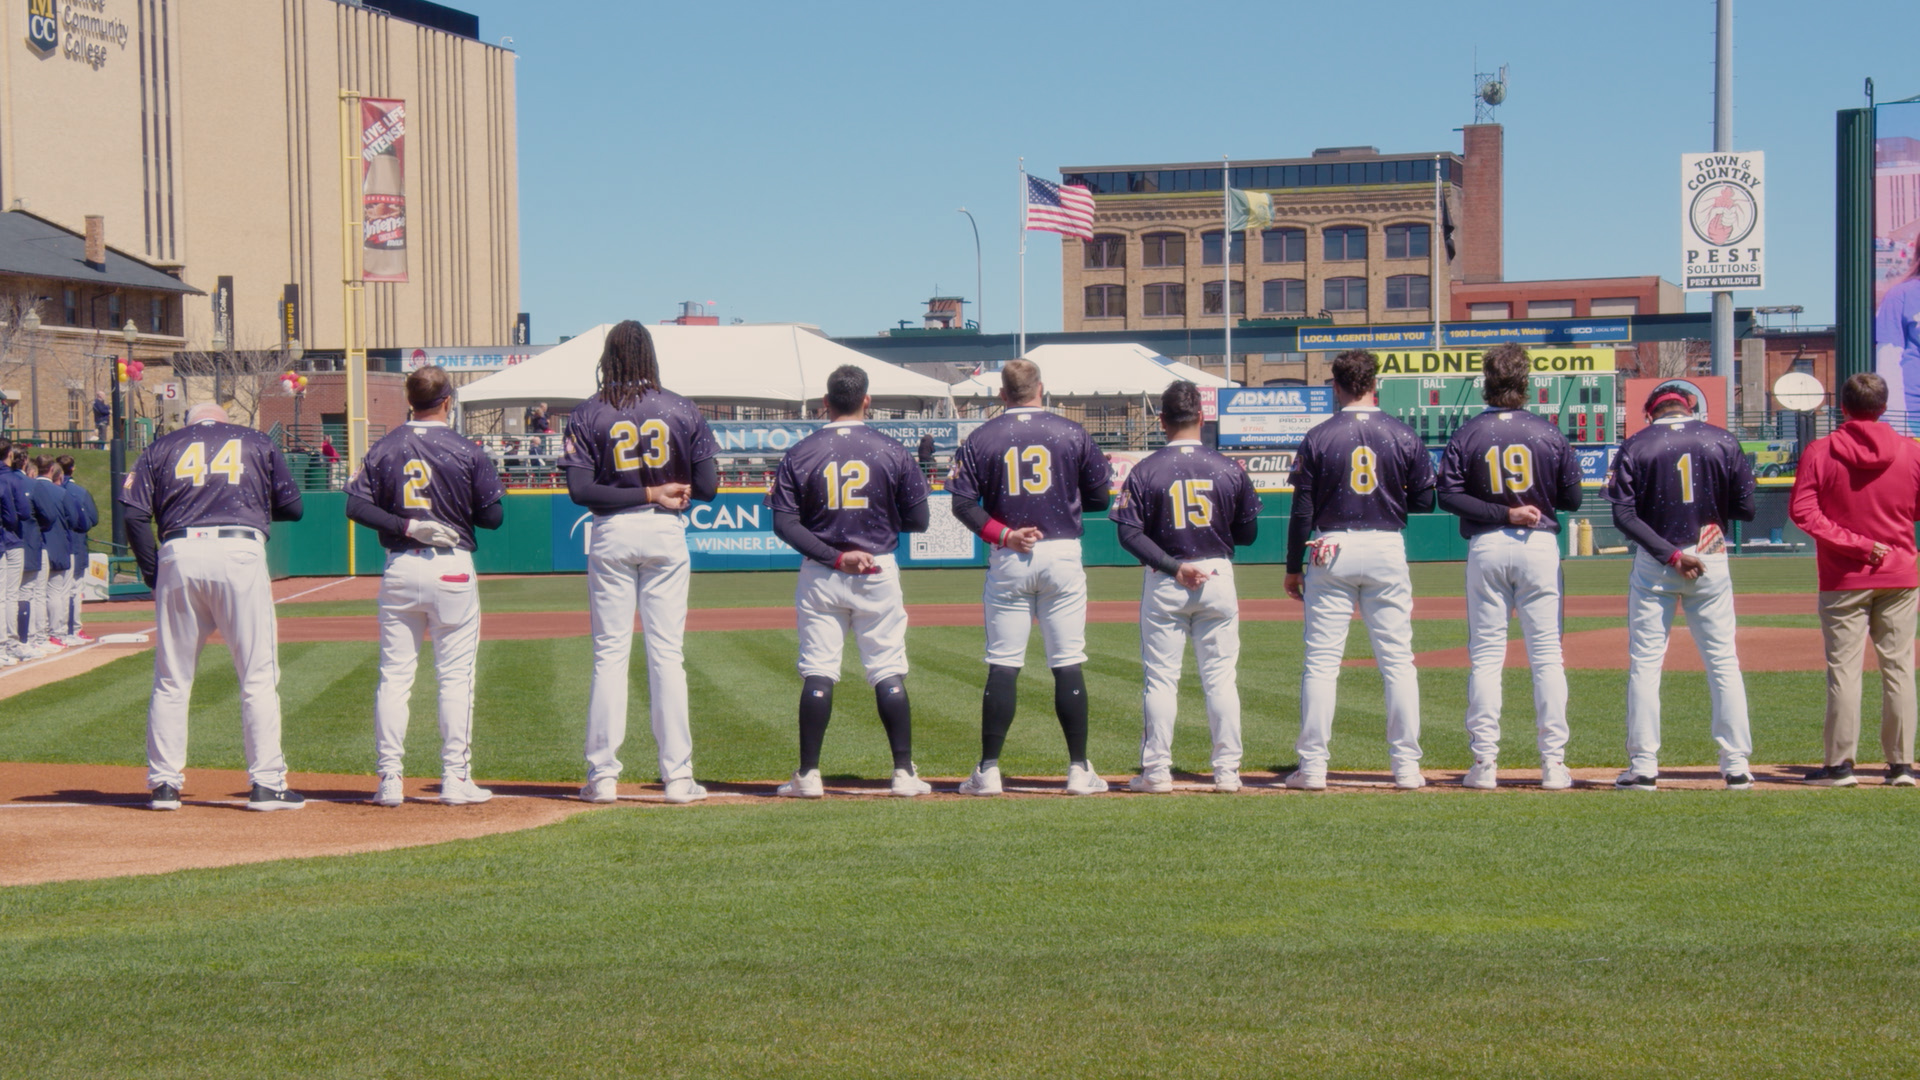 A photo of the back of a baseball team standing for the National Anthem